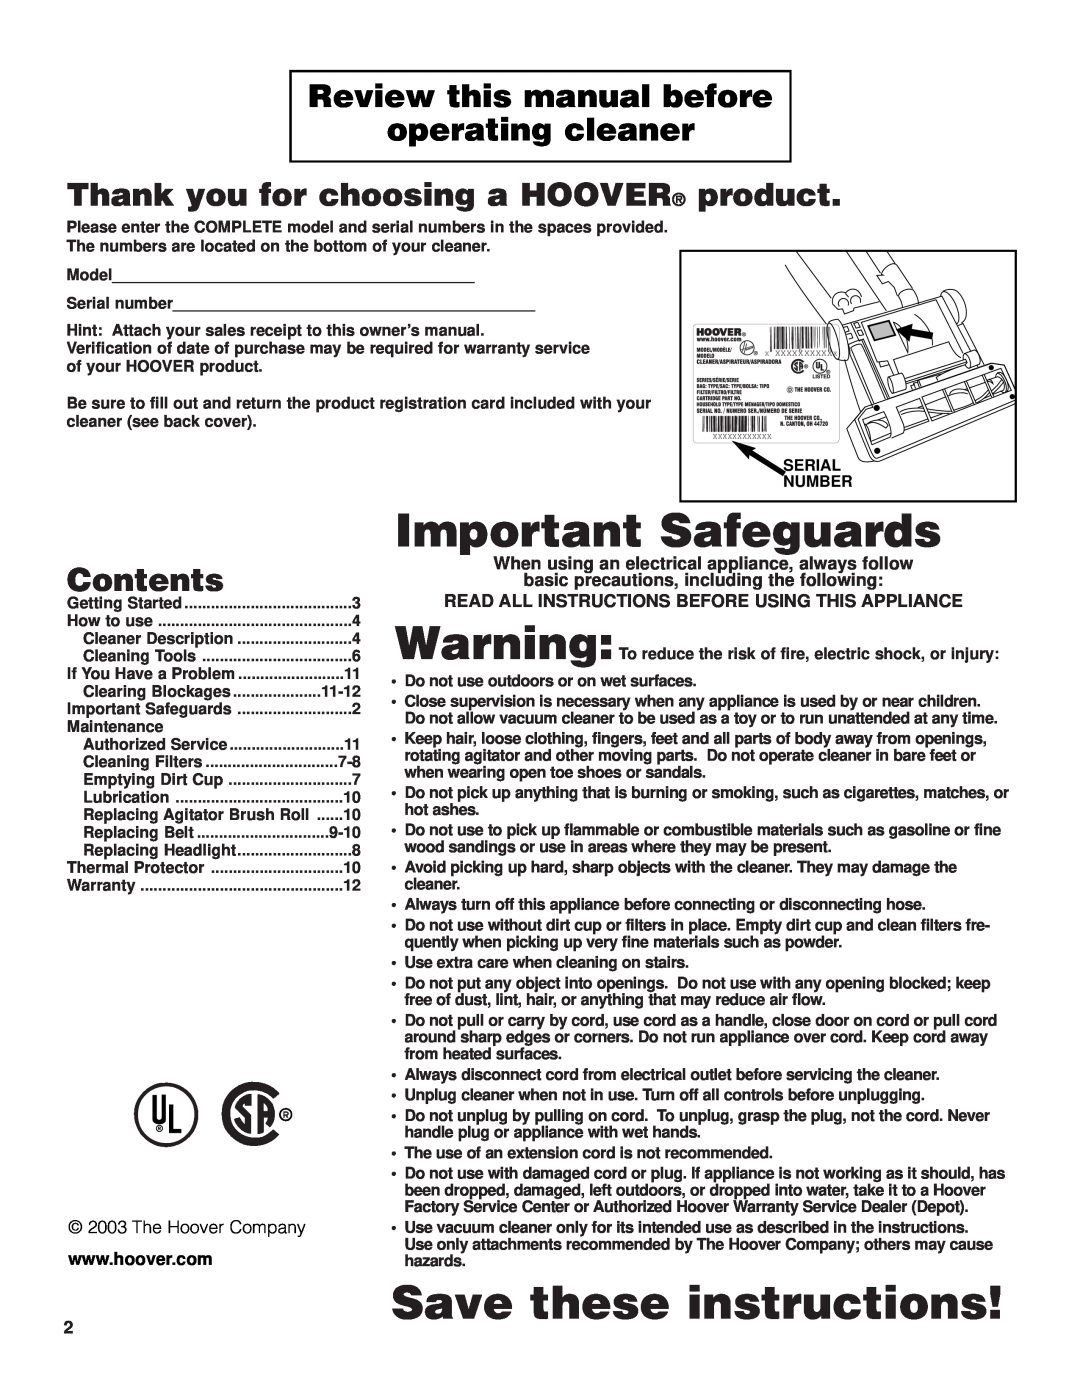 Hoover FoldAwayTM Upright Review this manual before operating cleaner, Thank you for choosing a HOOVER product, Contents 